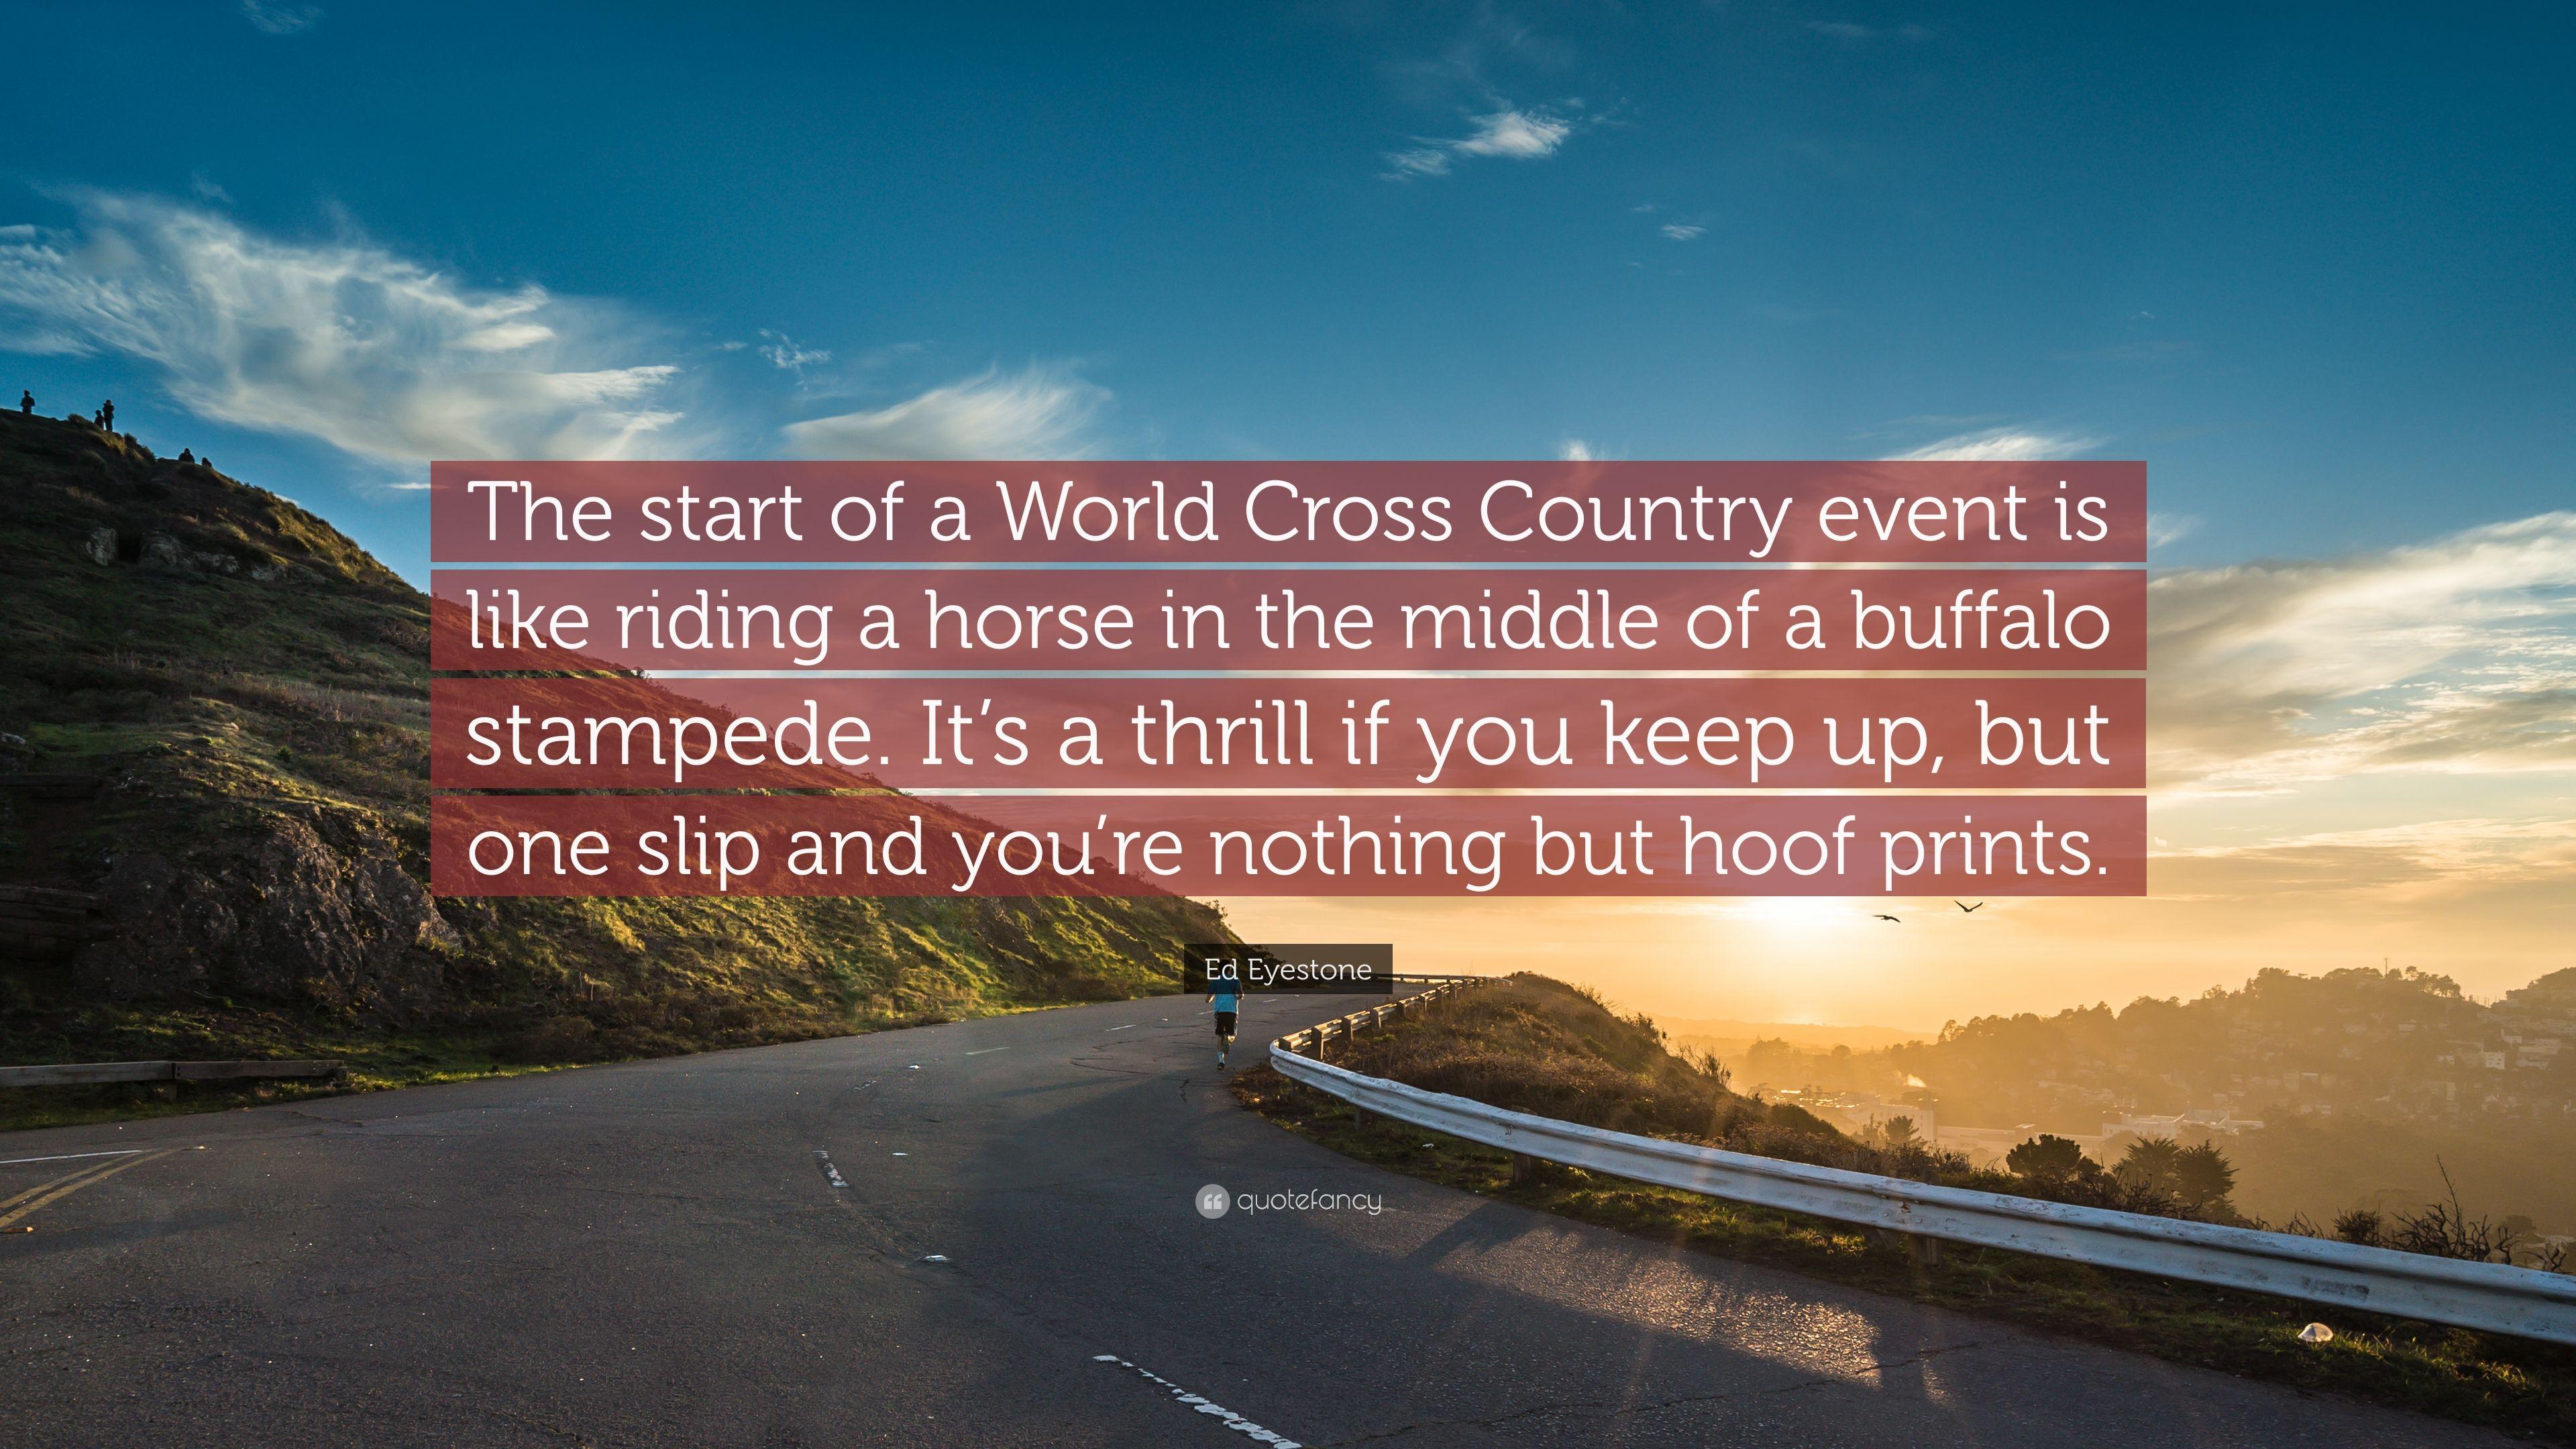 Ed Eyestone Quote: “The start of a World Cross Country event is like